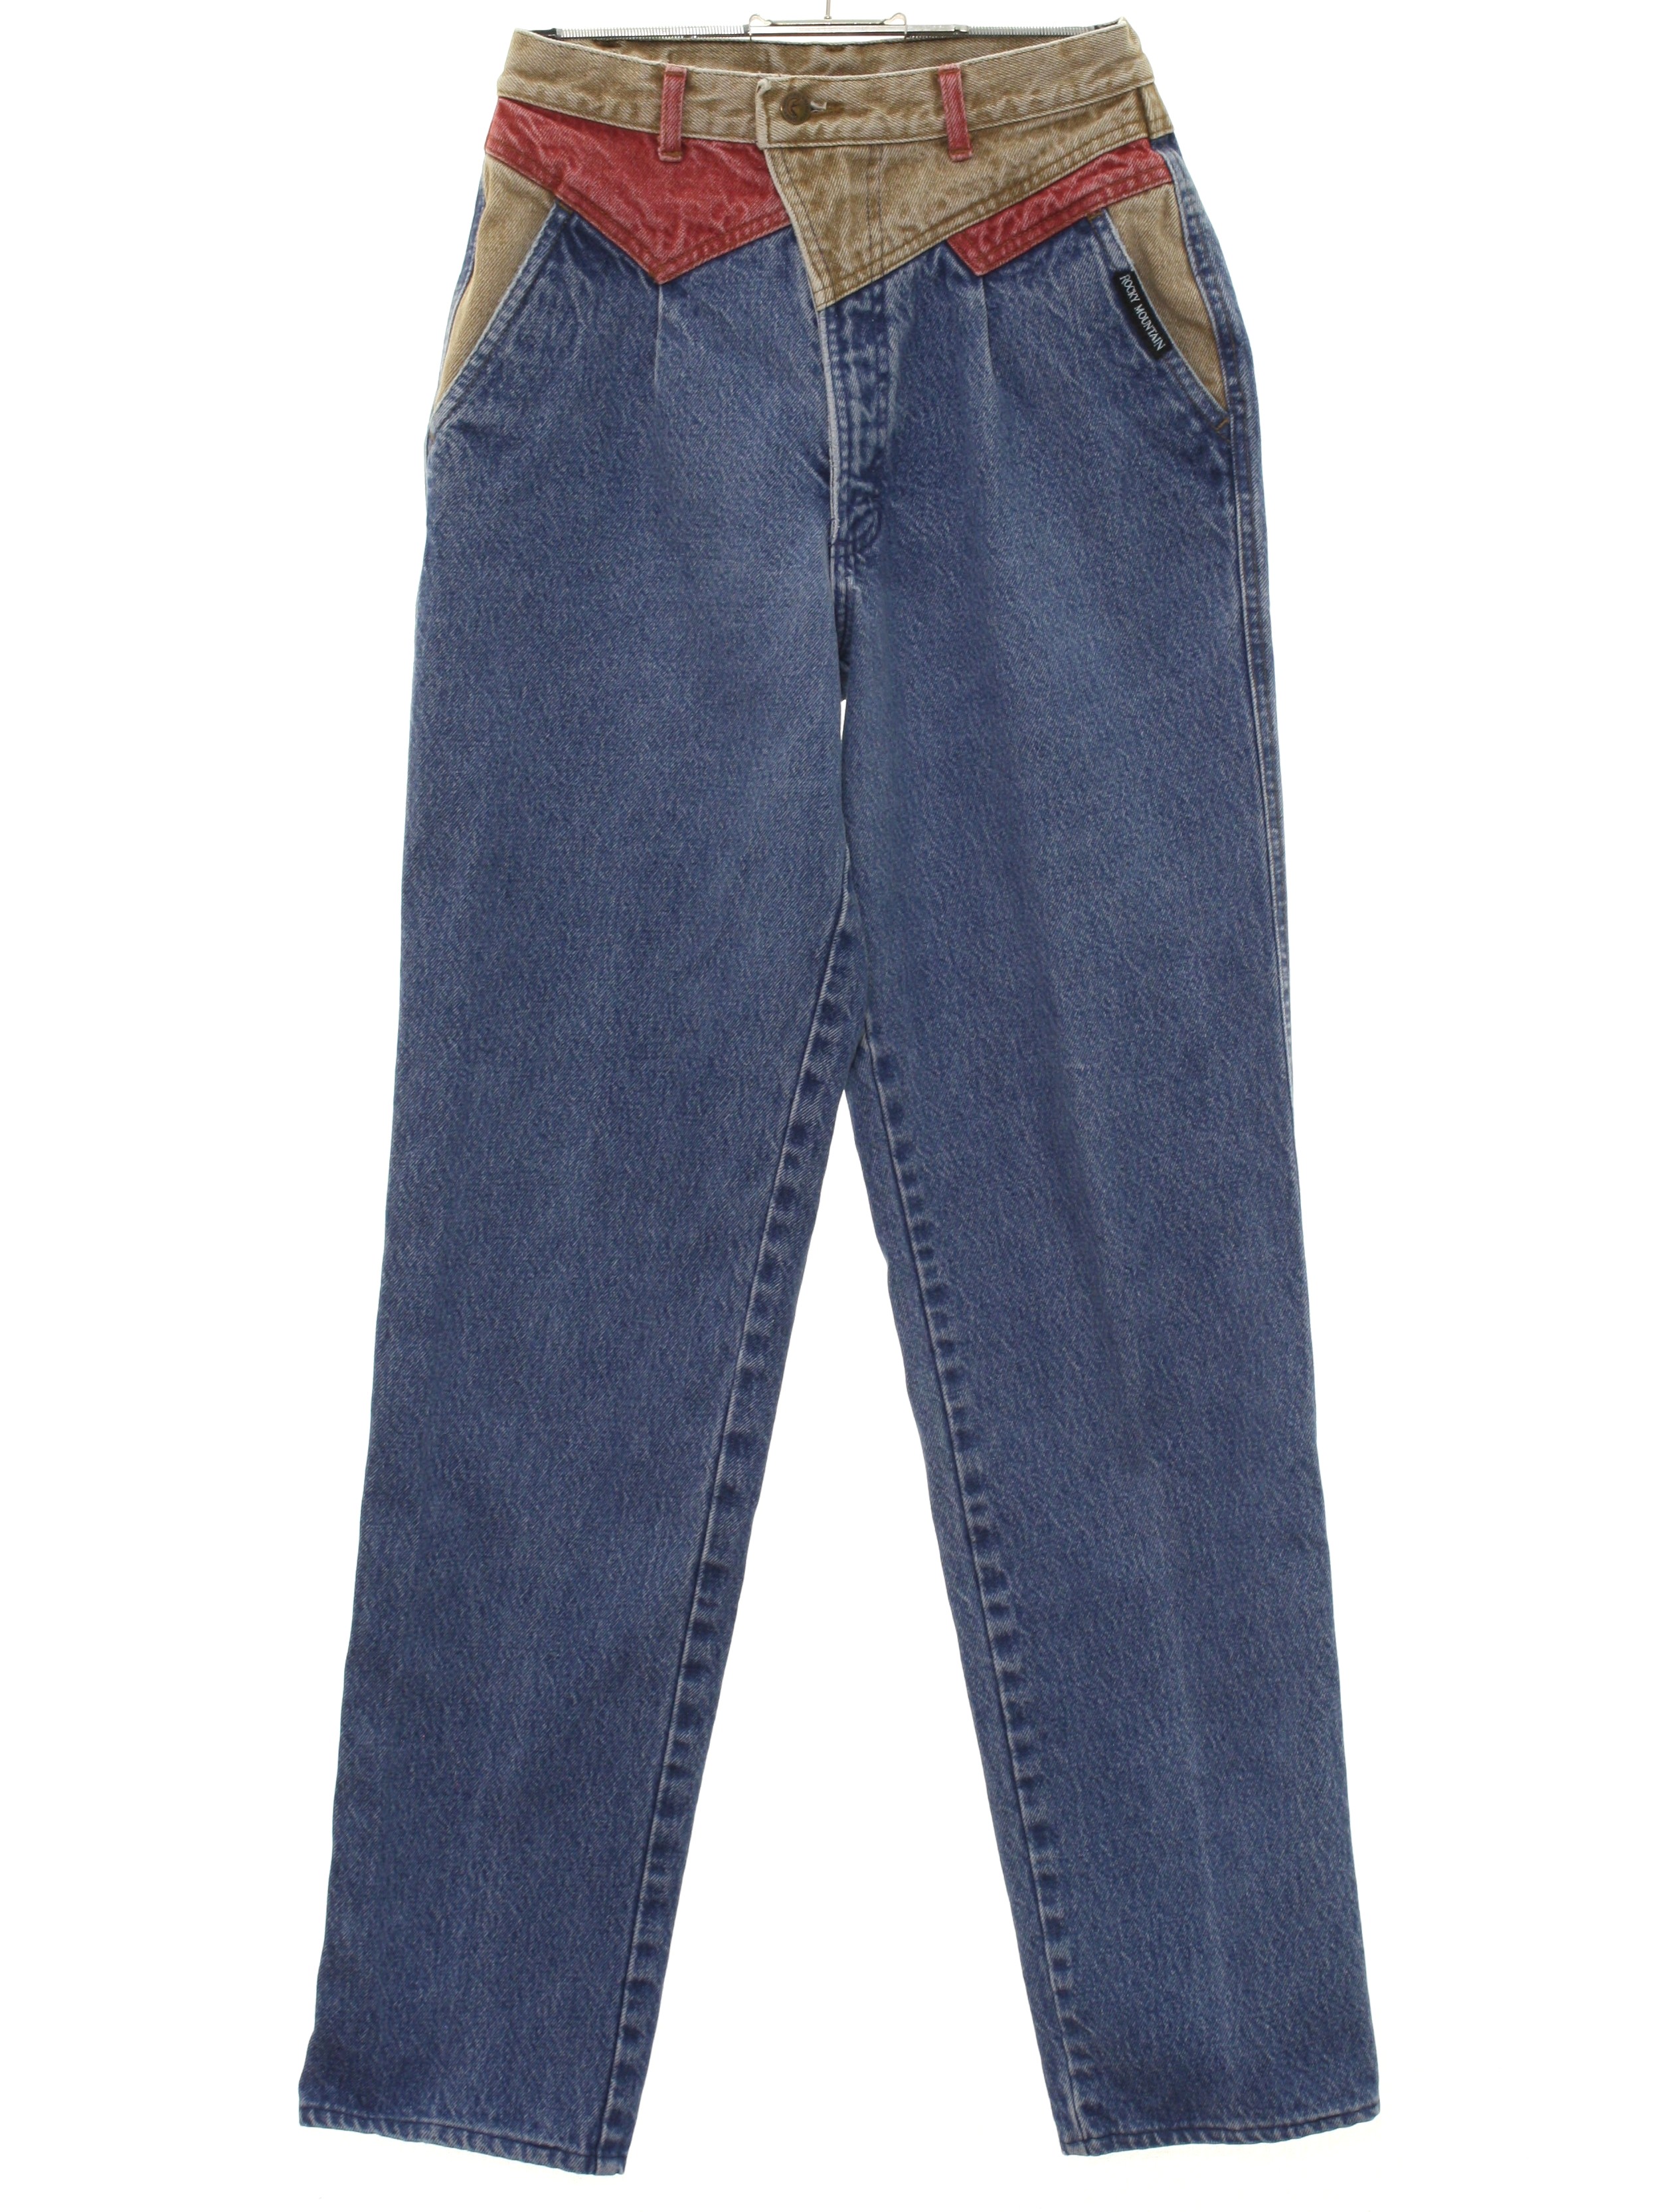 rocky mountain jeans with flaps